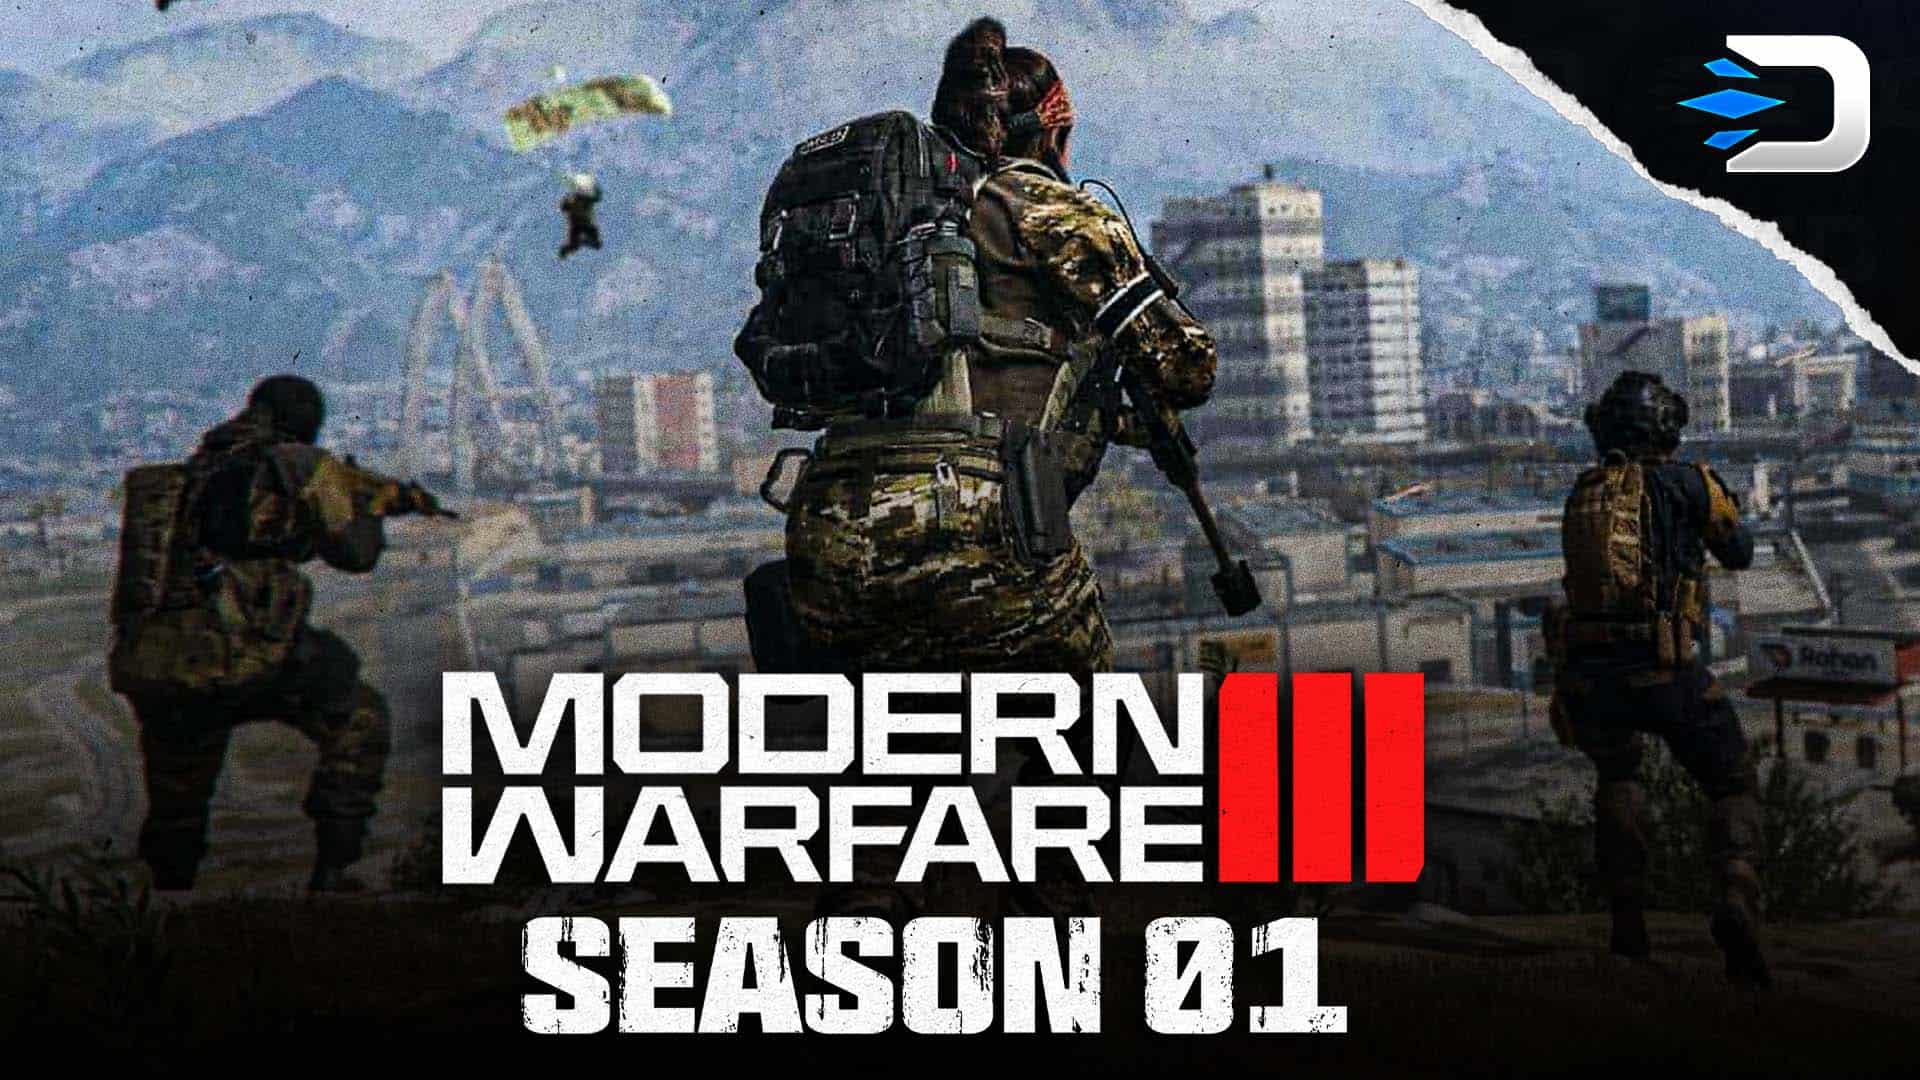 While it's clear from the trailer that Modern Warfare 3 will see